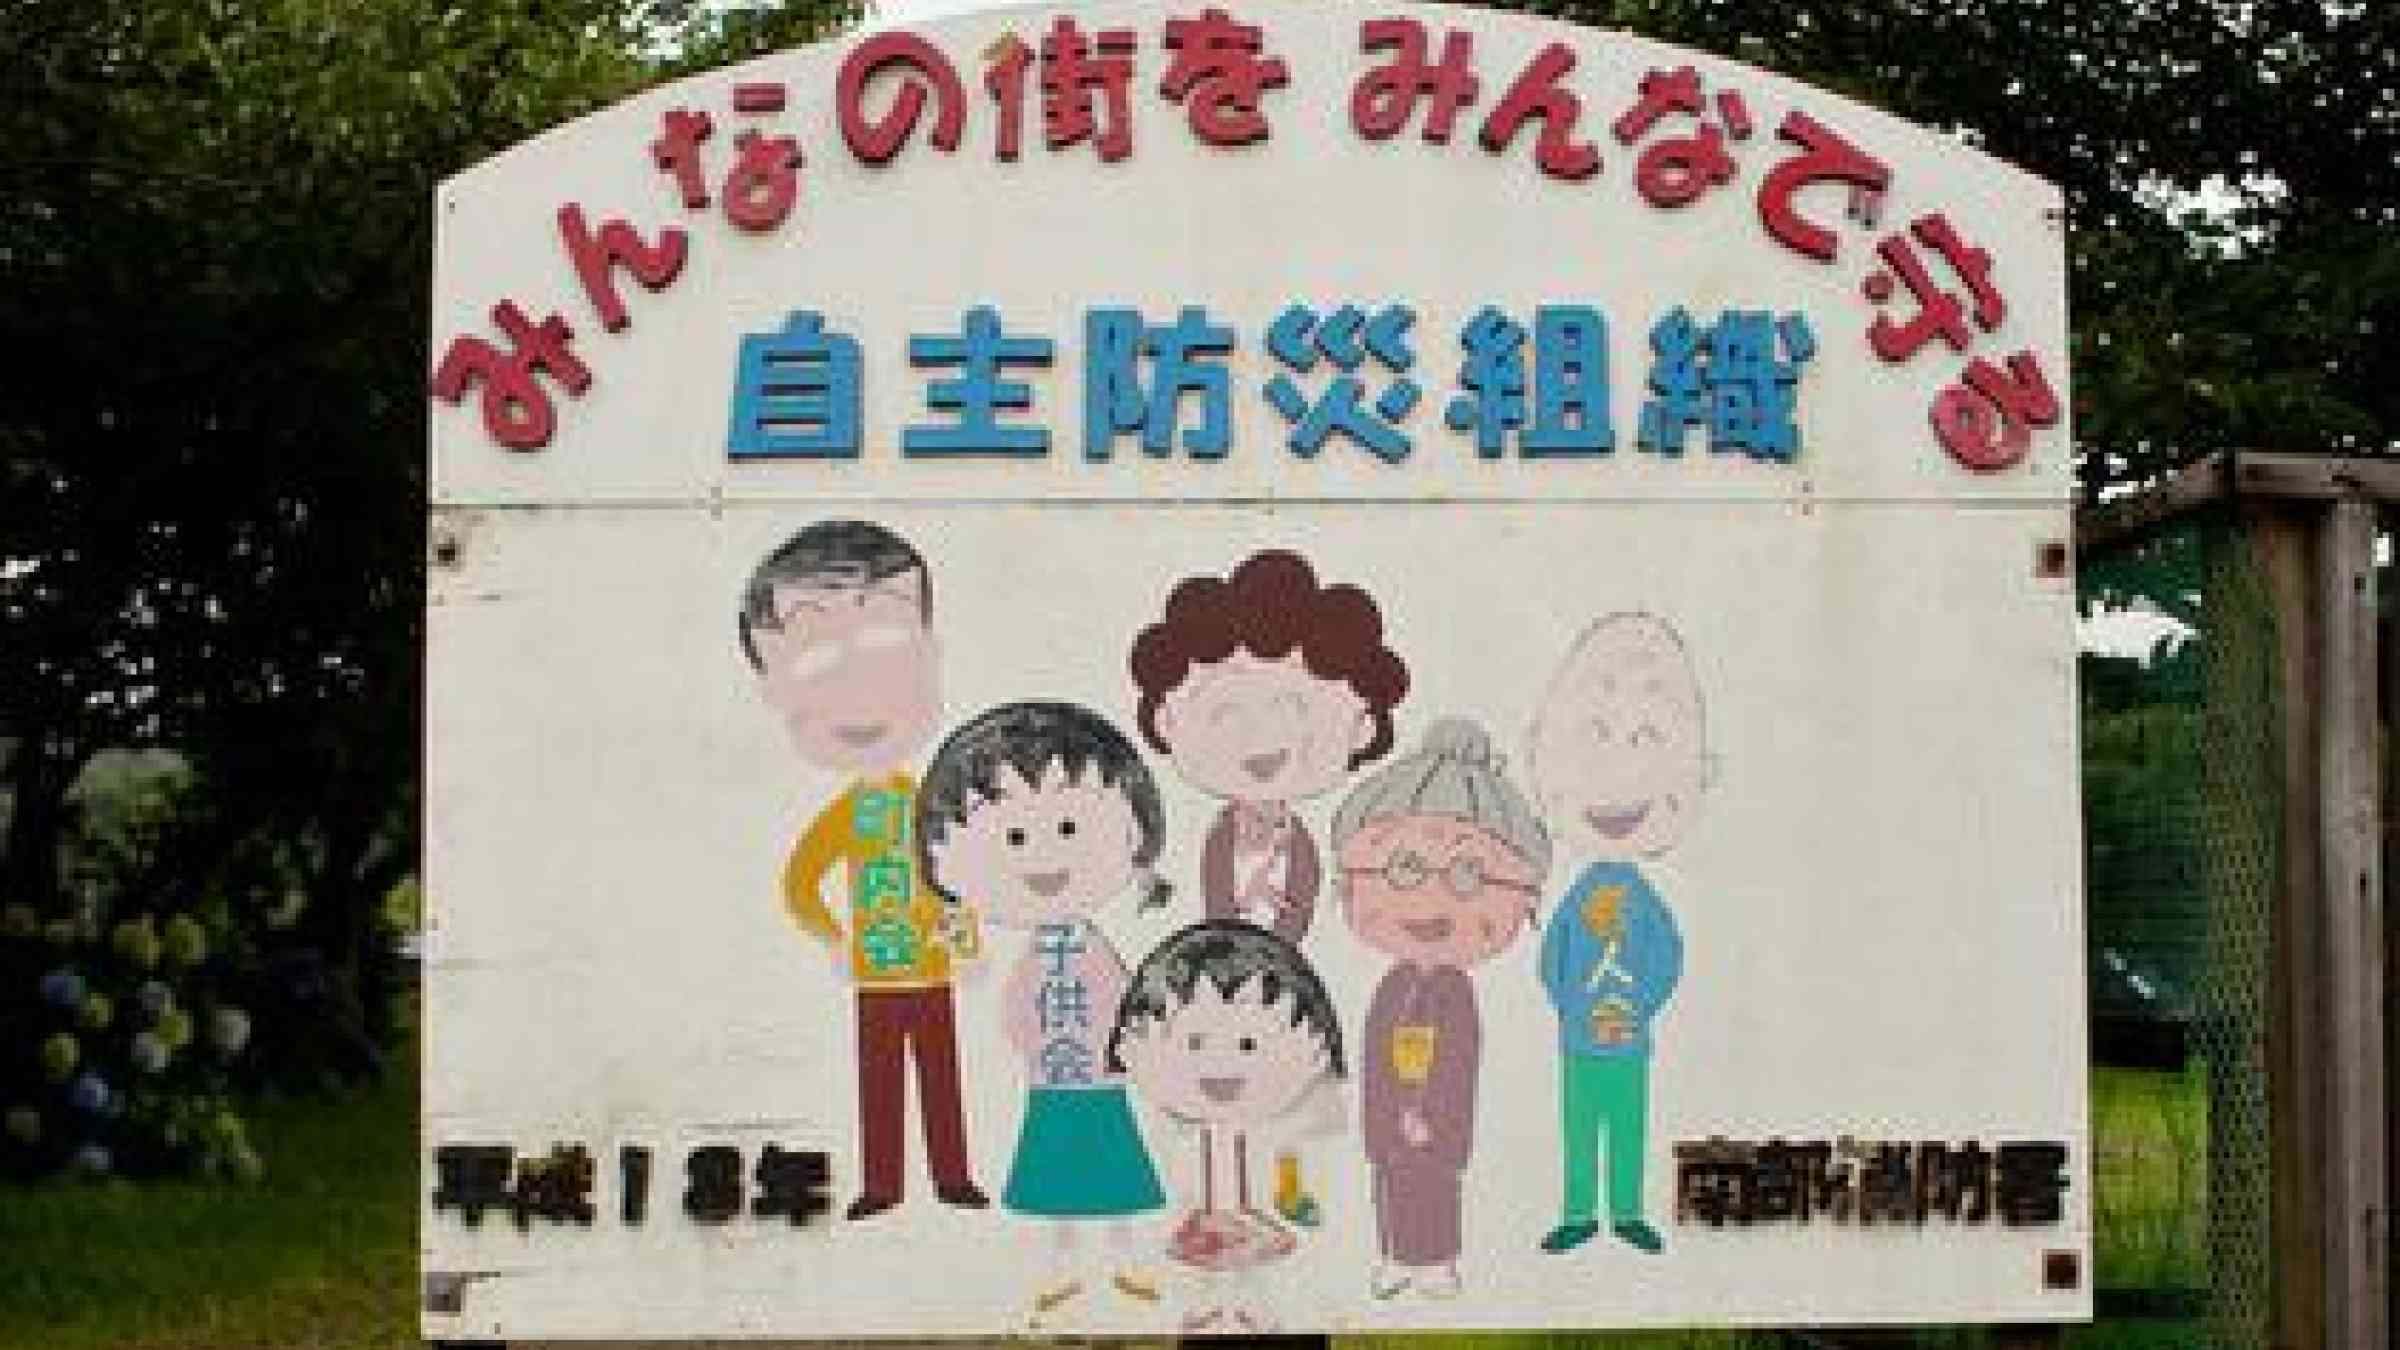 These billboards are a common sight around Japan explaining how communities can come together to reduce disaster risk. This particular billboard features popular Japanese cartoon character Maruko-chan.